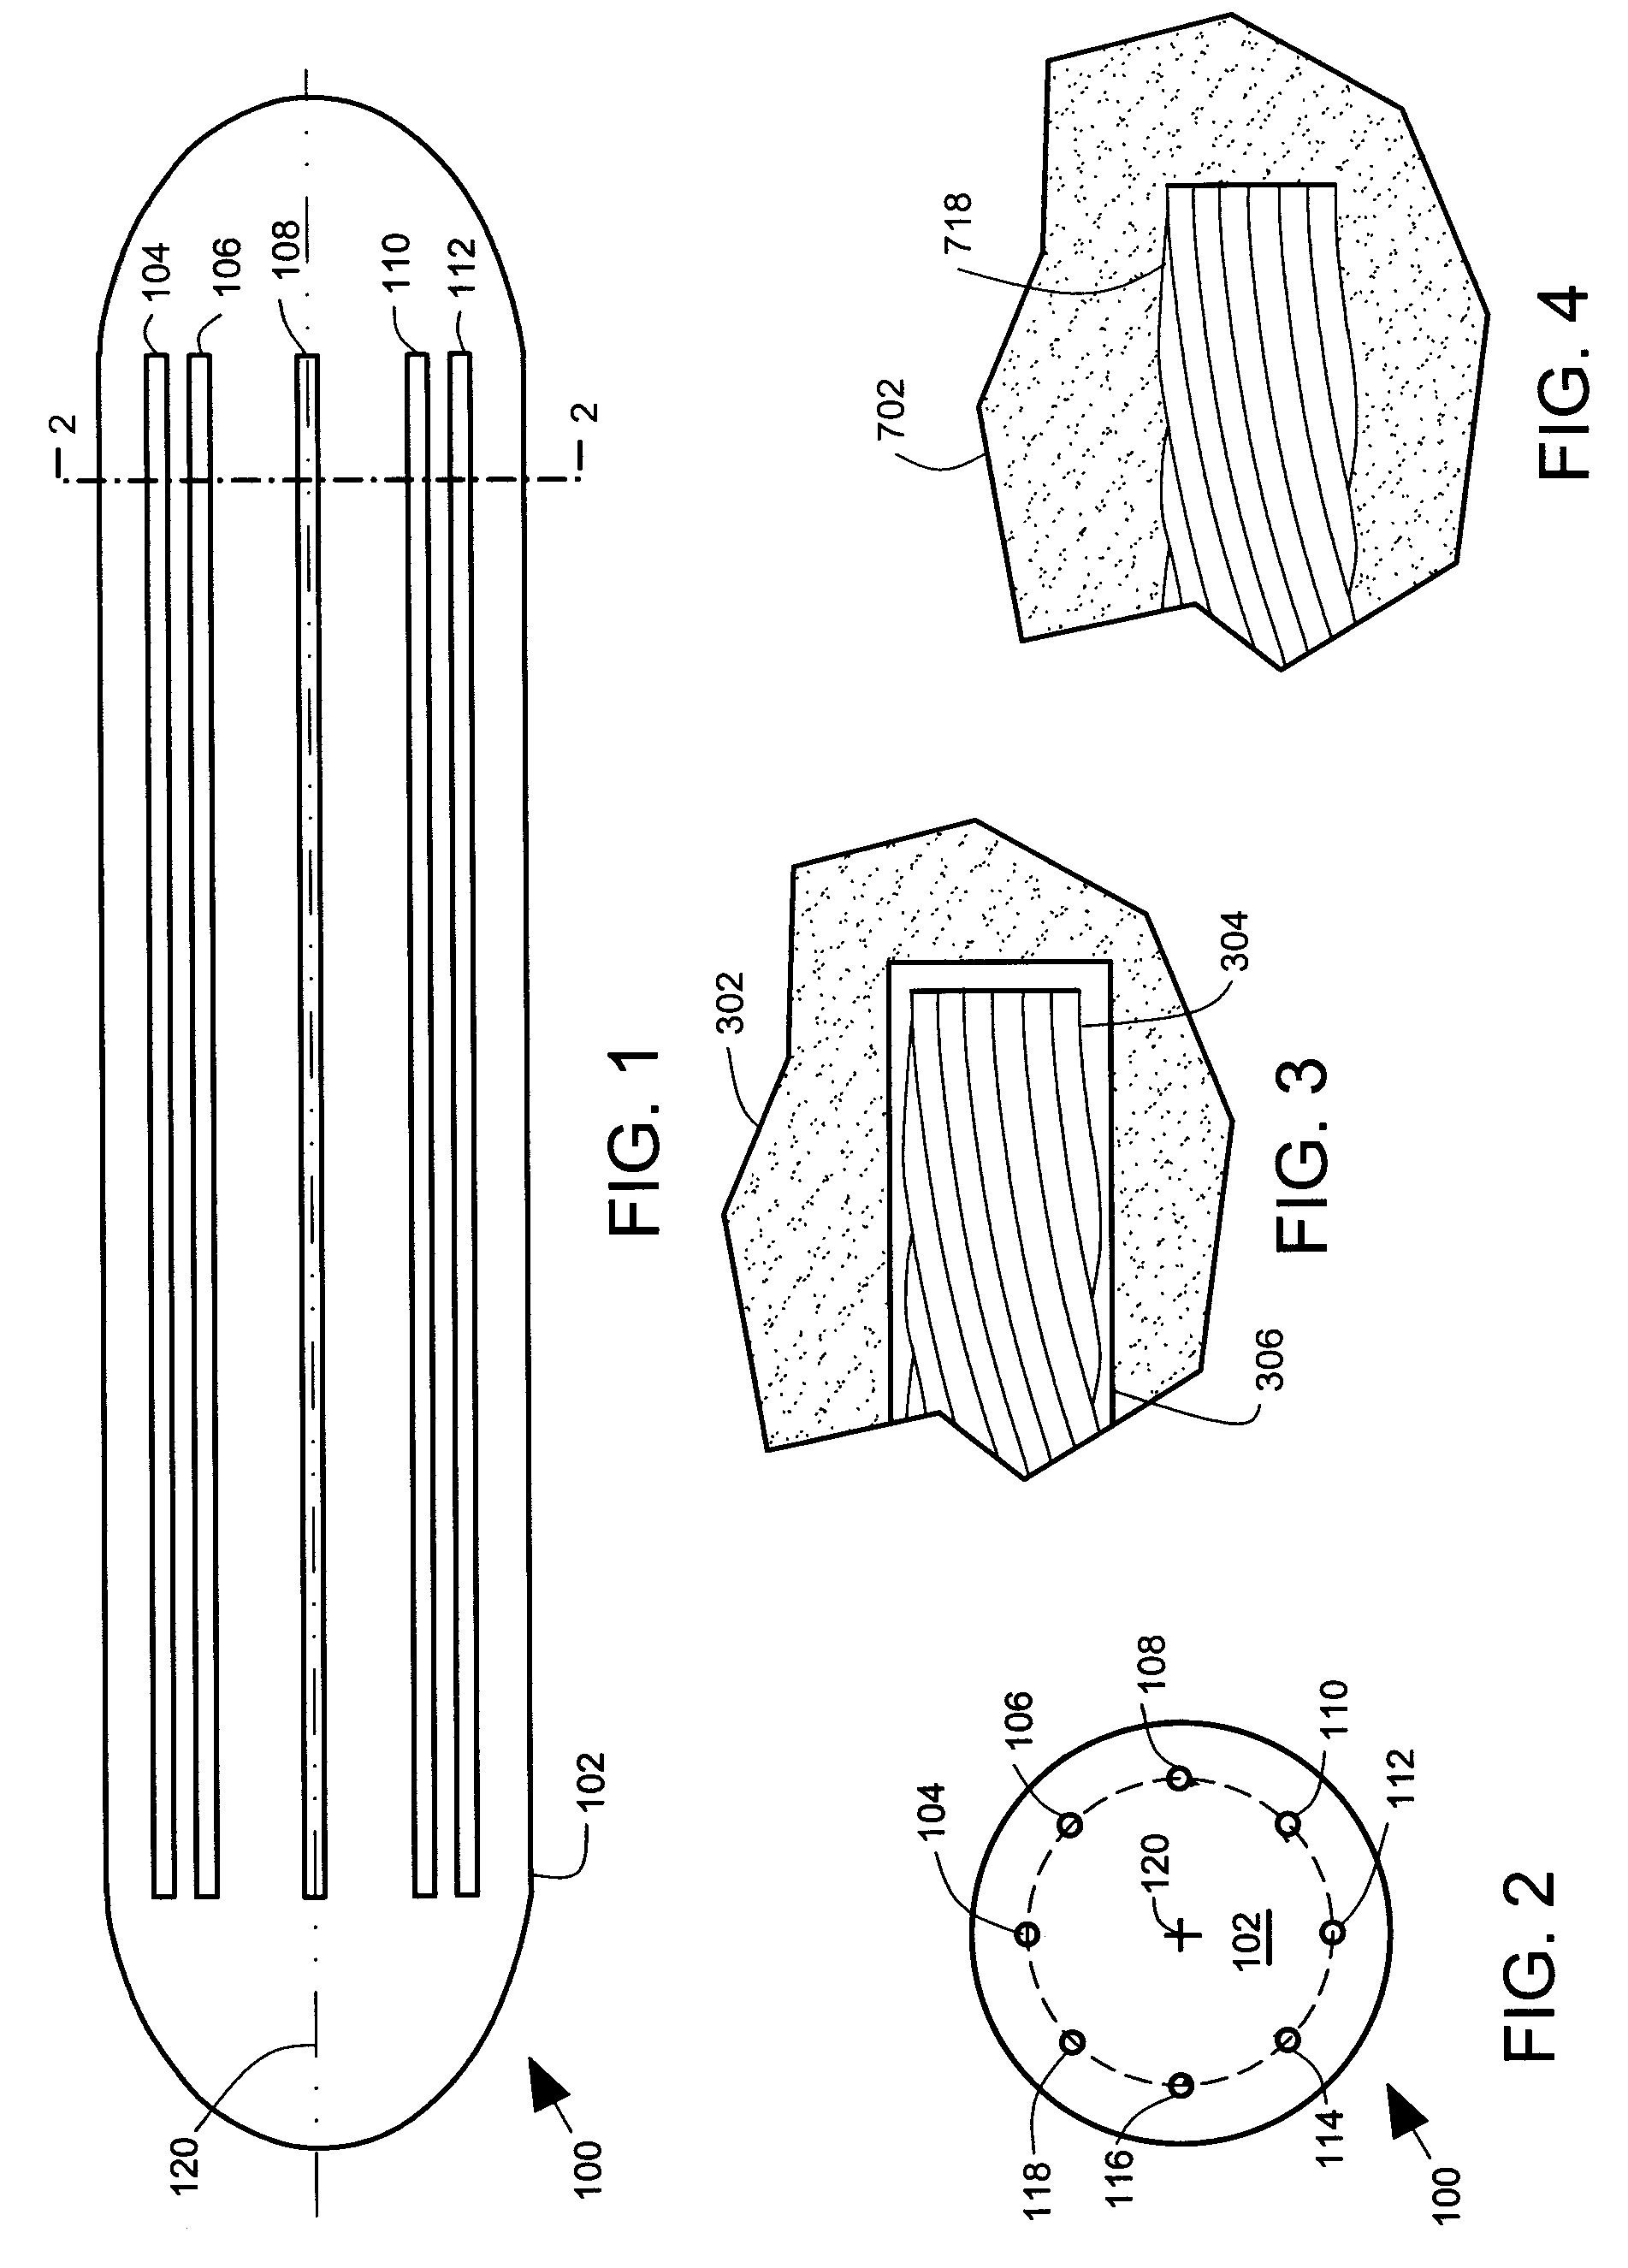 Malleable prosthesis with enhanced concealability